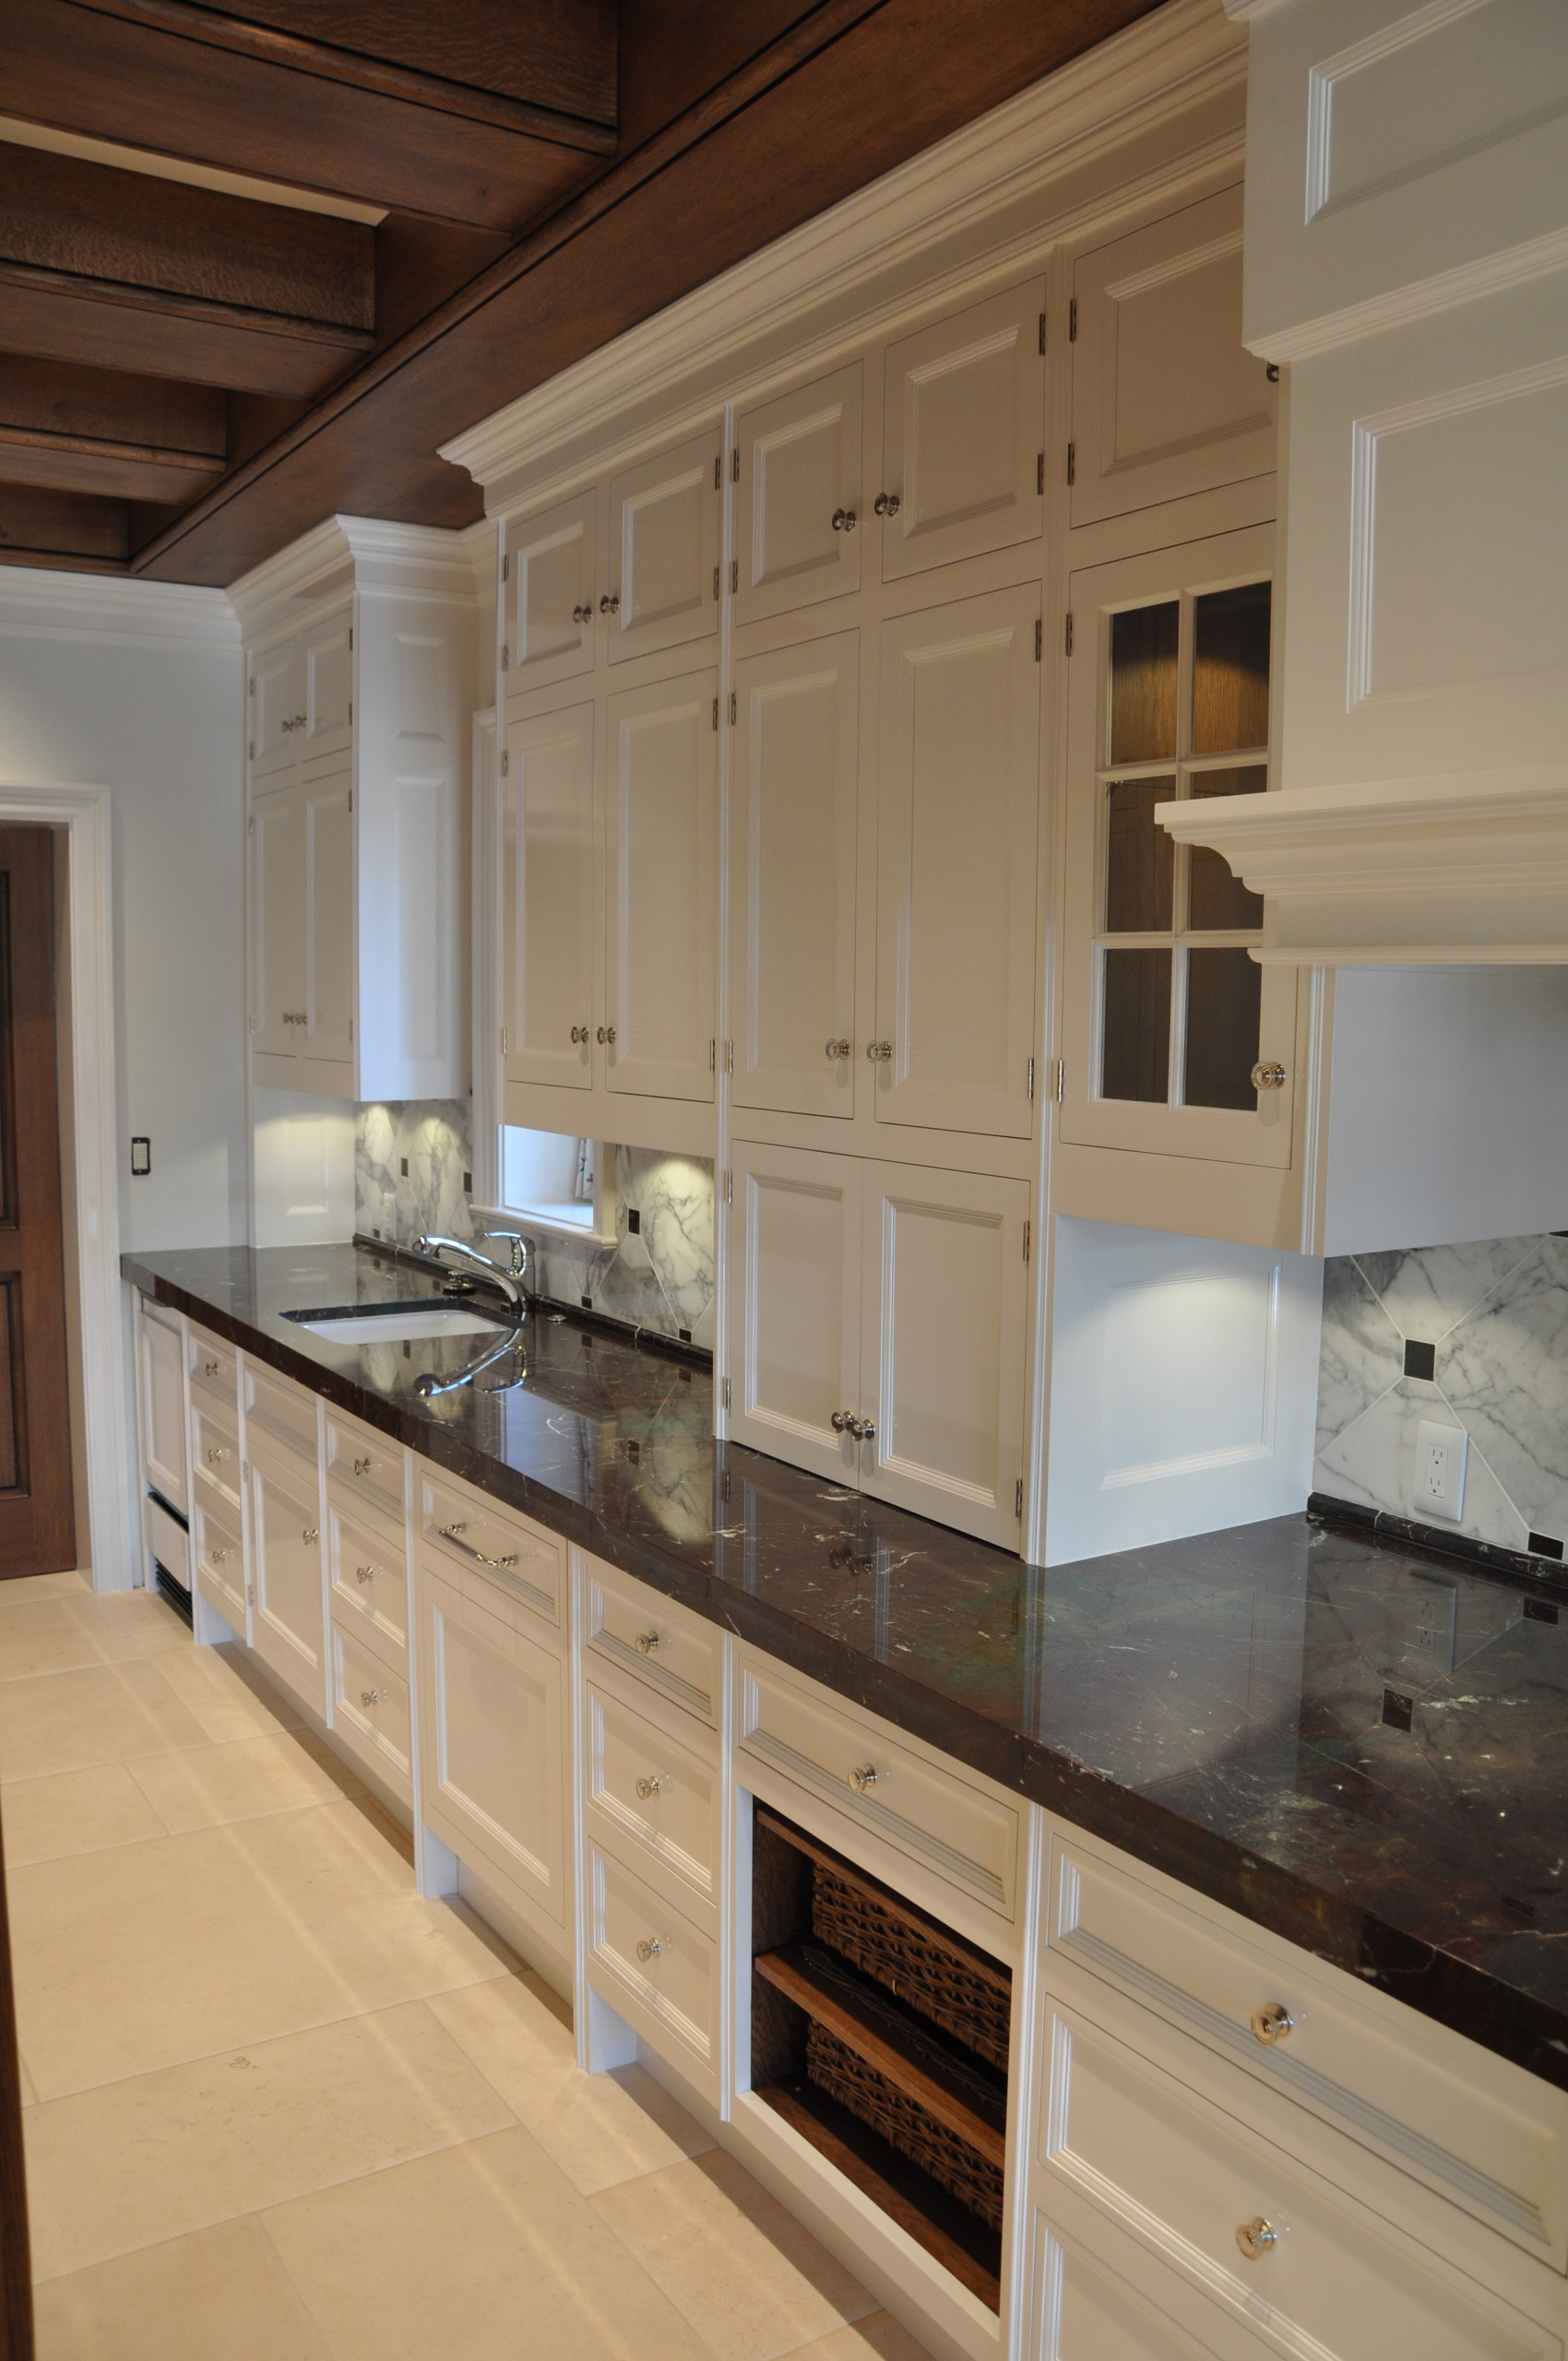 Refectory Kitchen with custom made hardware, hand painted with high gloss paint.